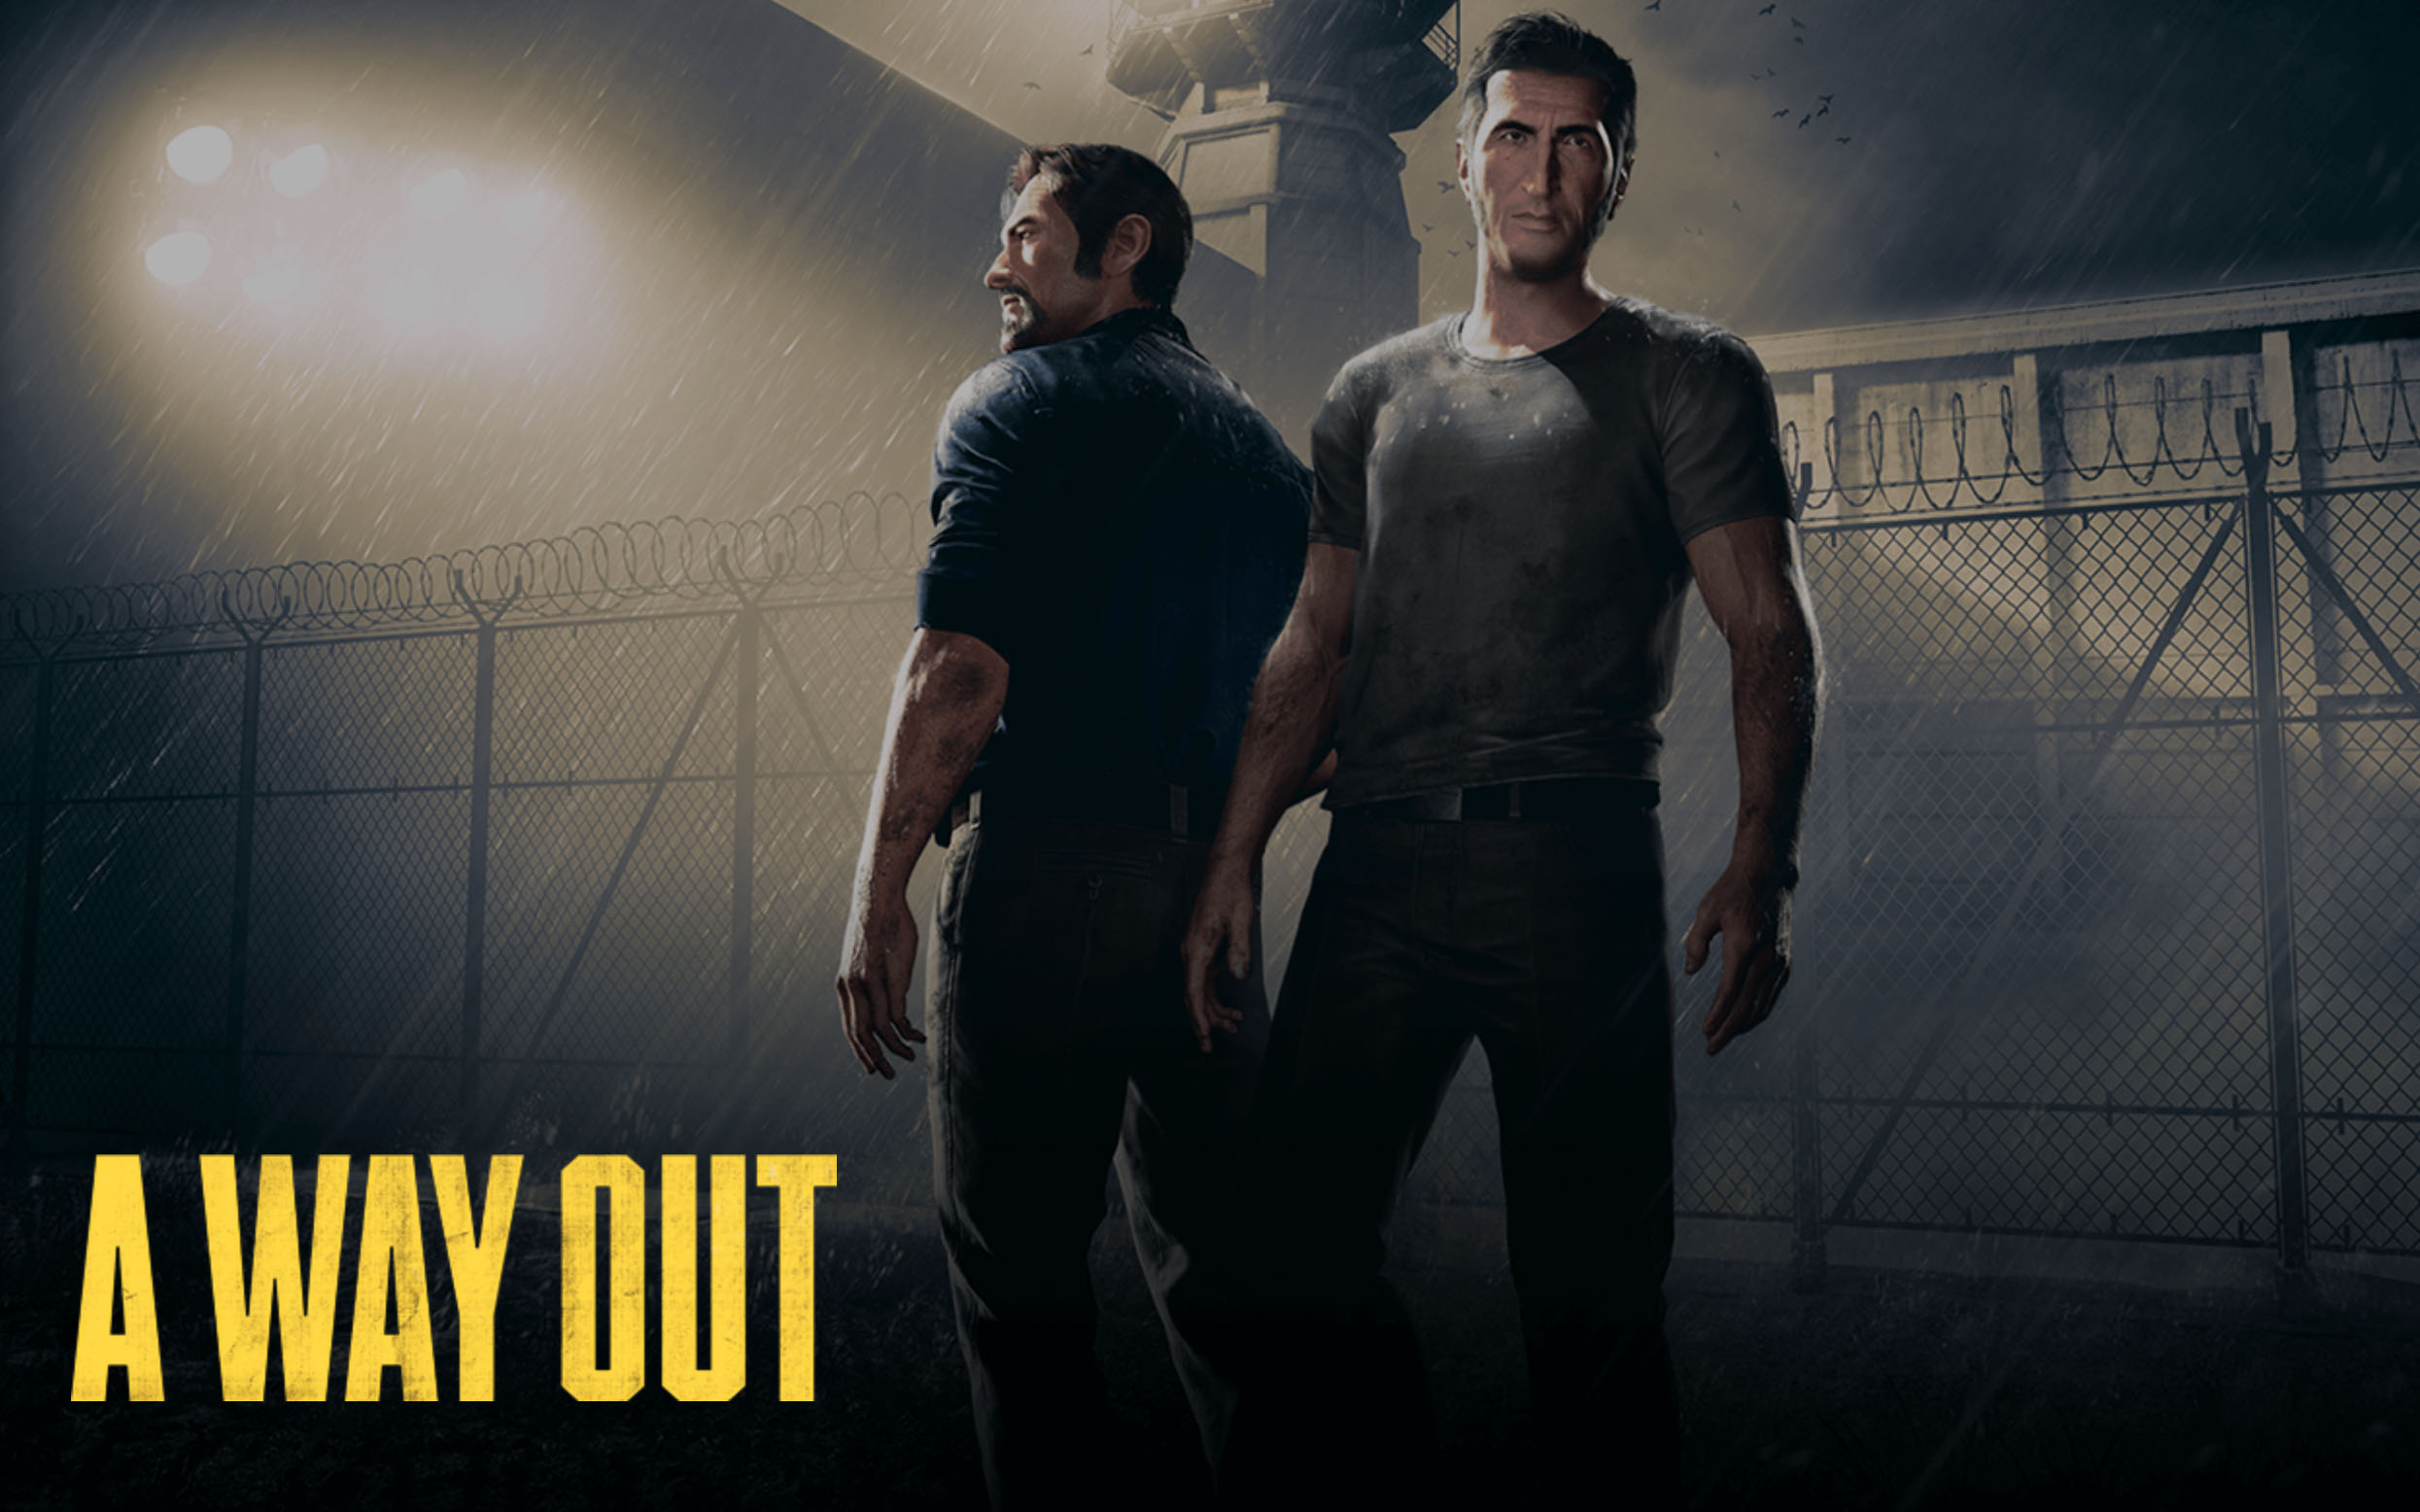 Covert art for the game 'A Way Out'